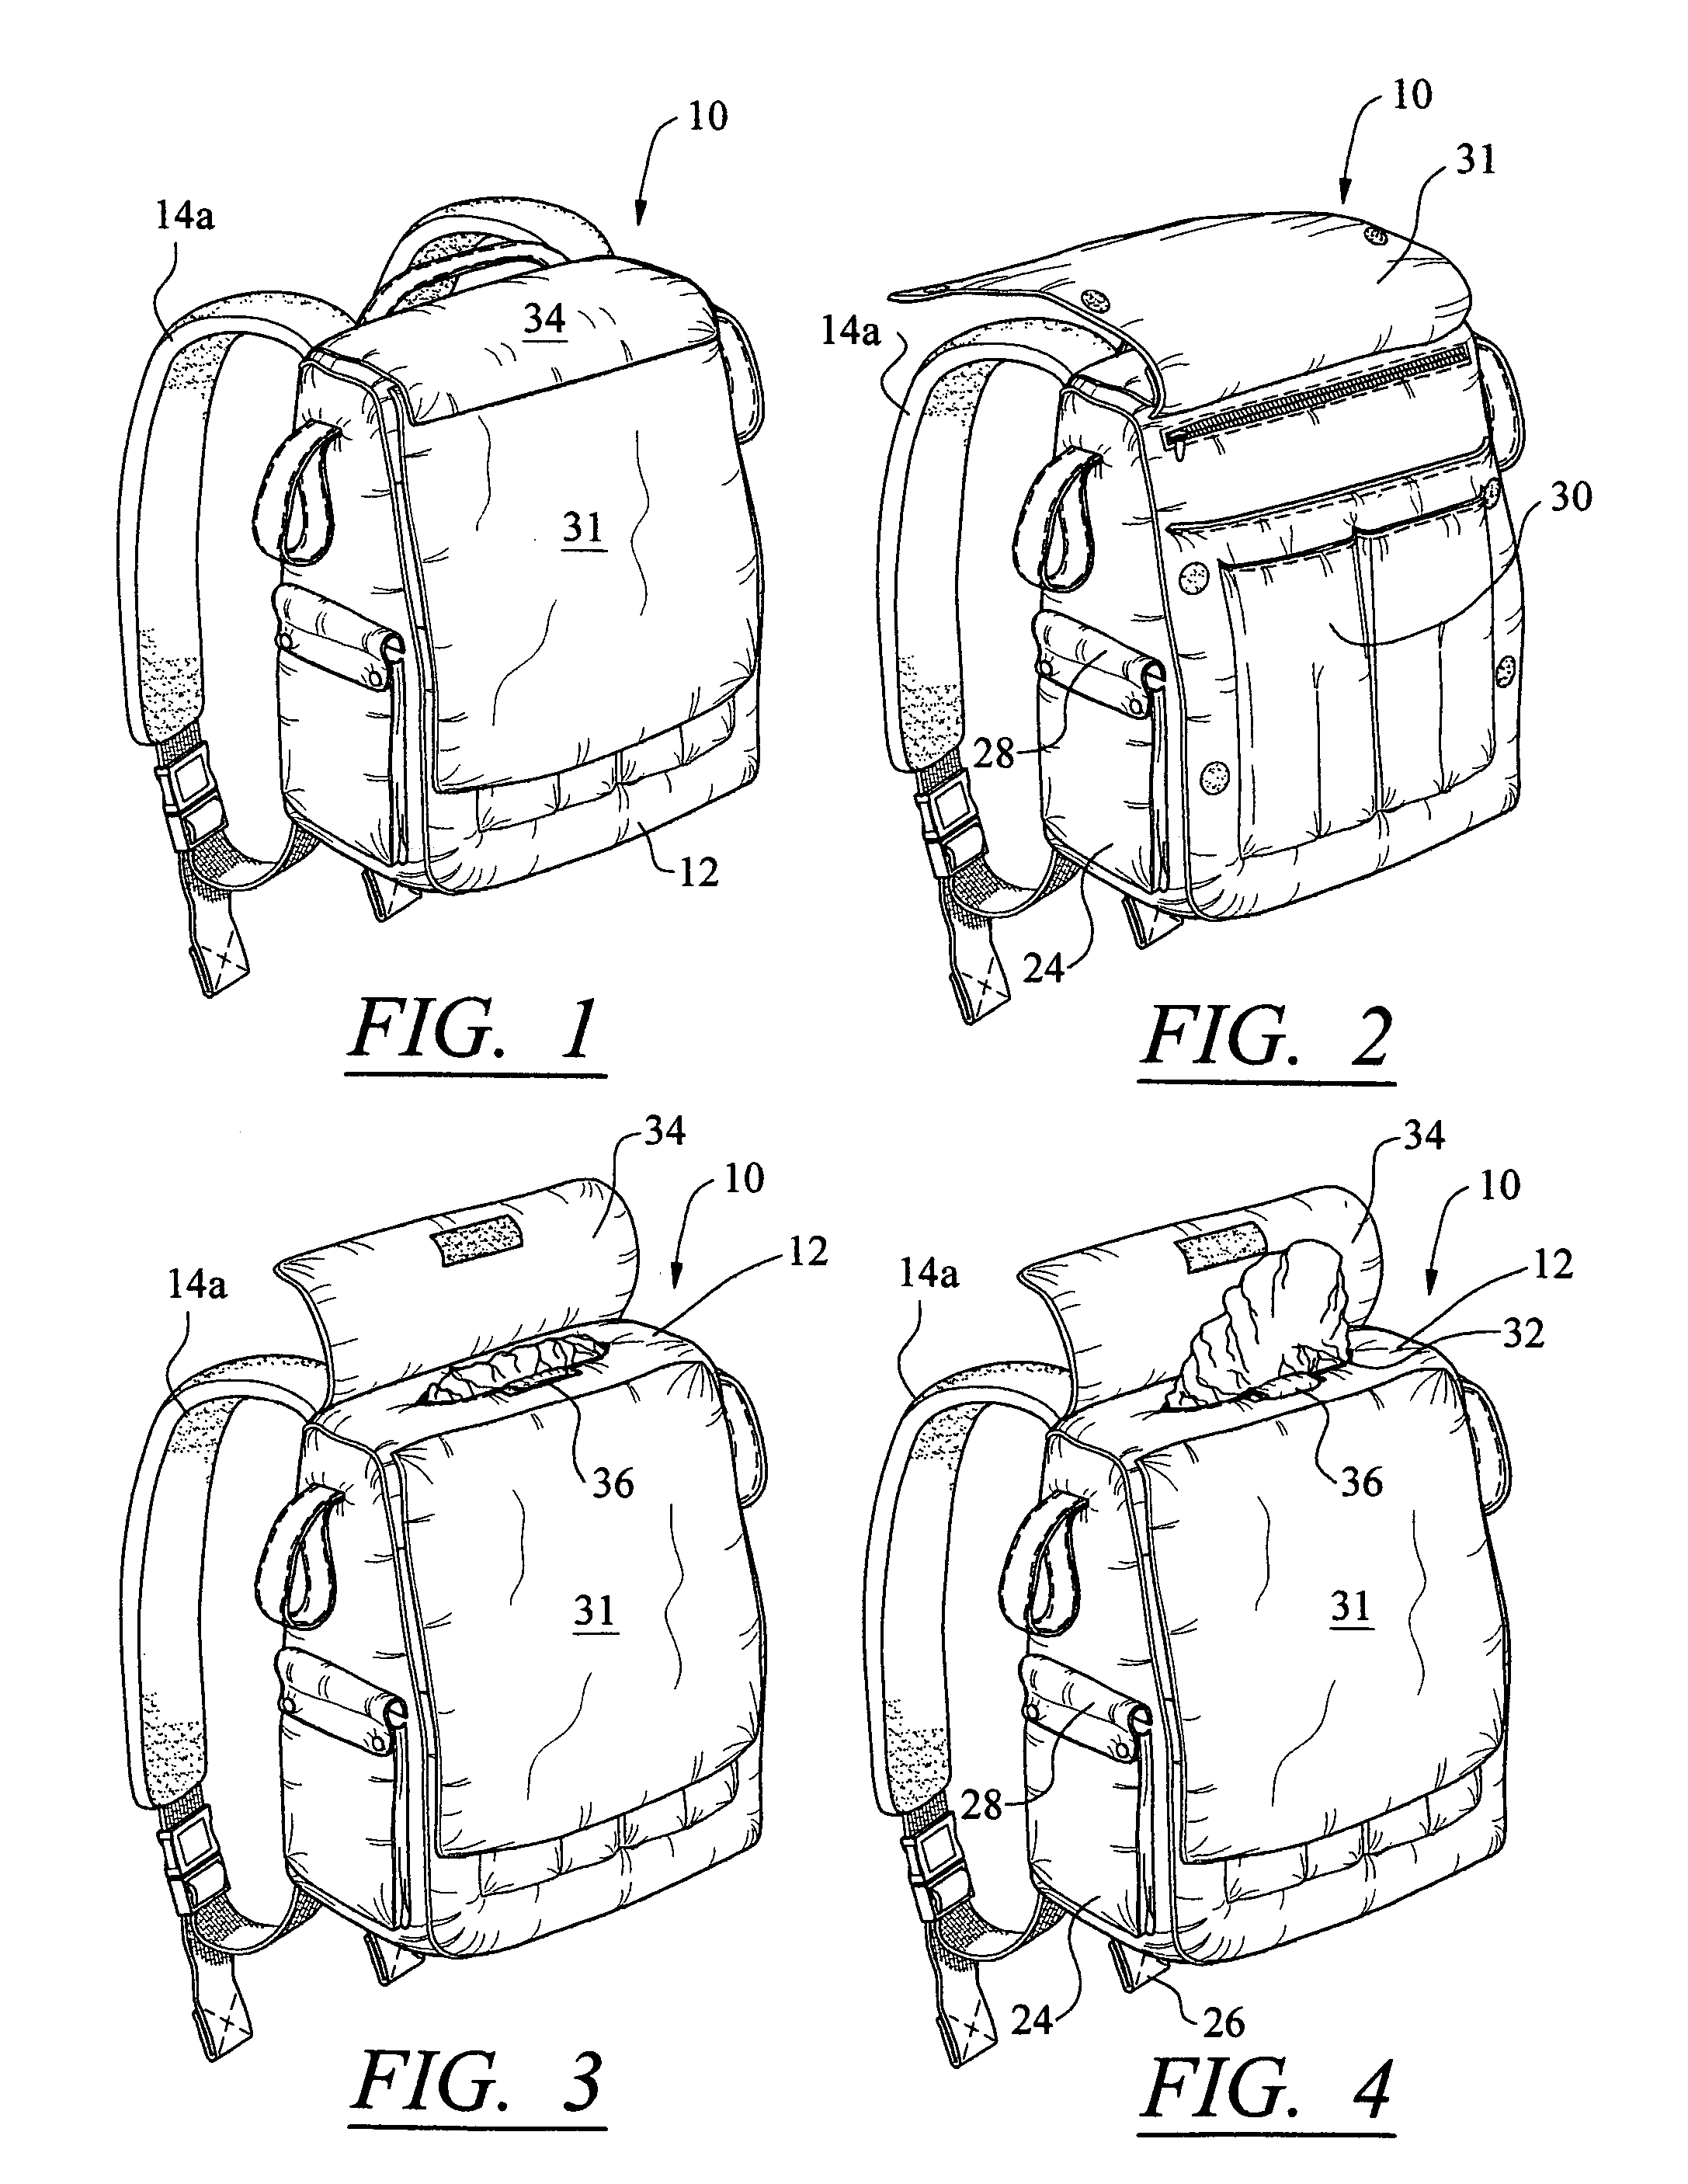 Backpack, pouch or clothing with integral raingear